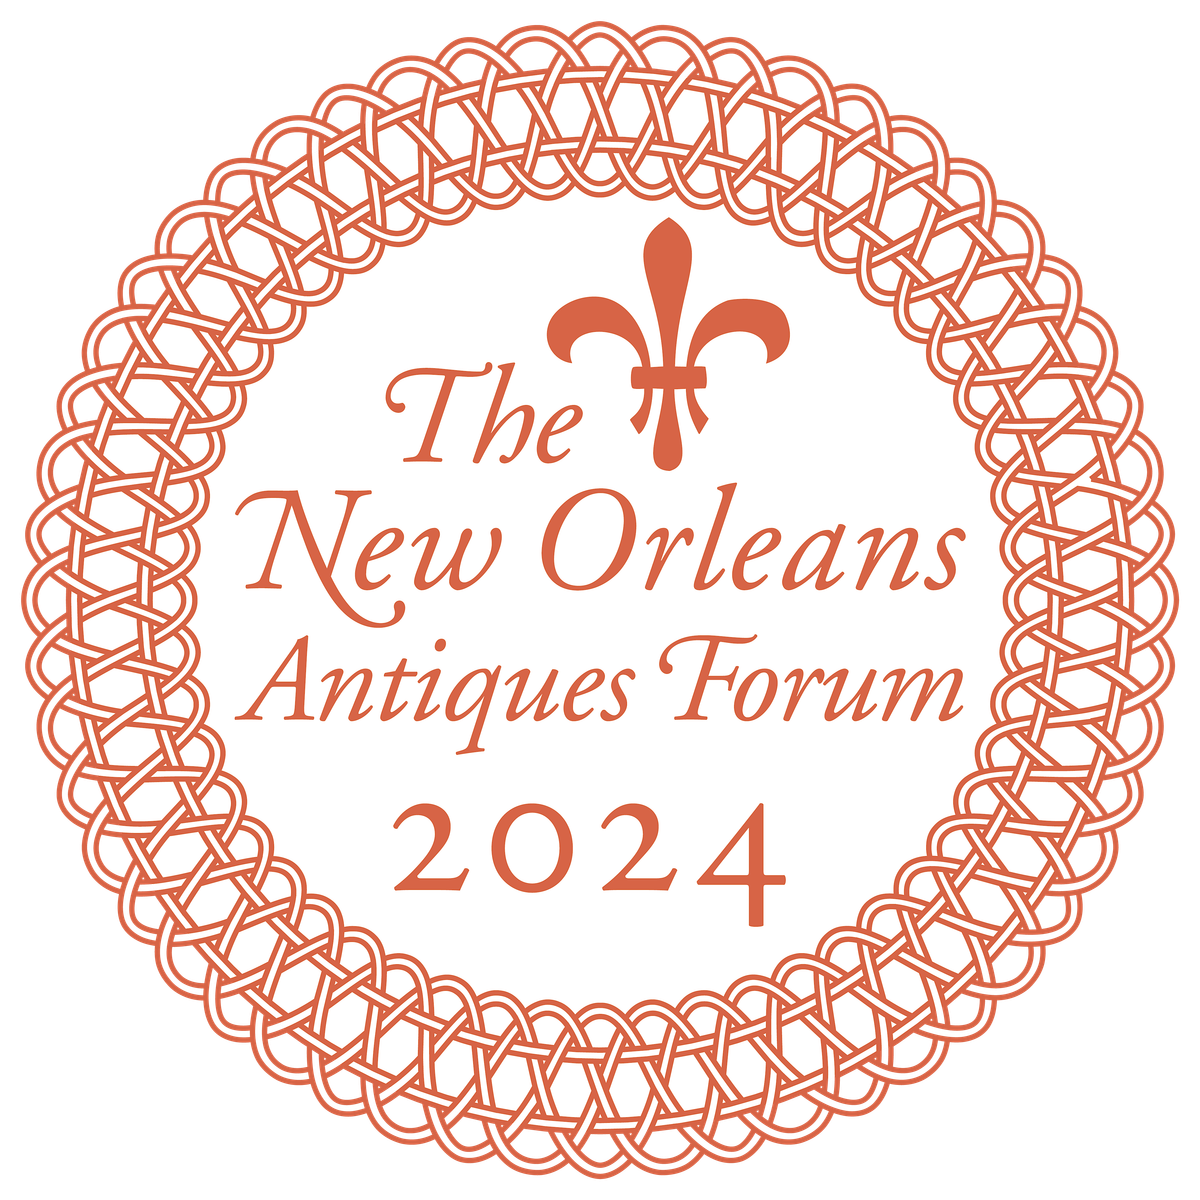 The 2024 New Orleans Antiques Forum